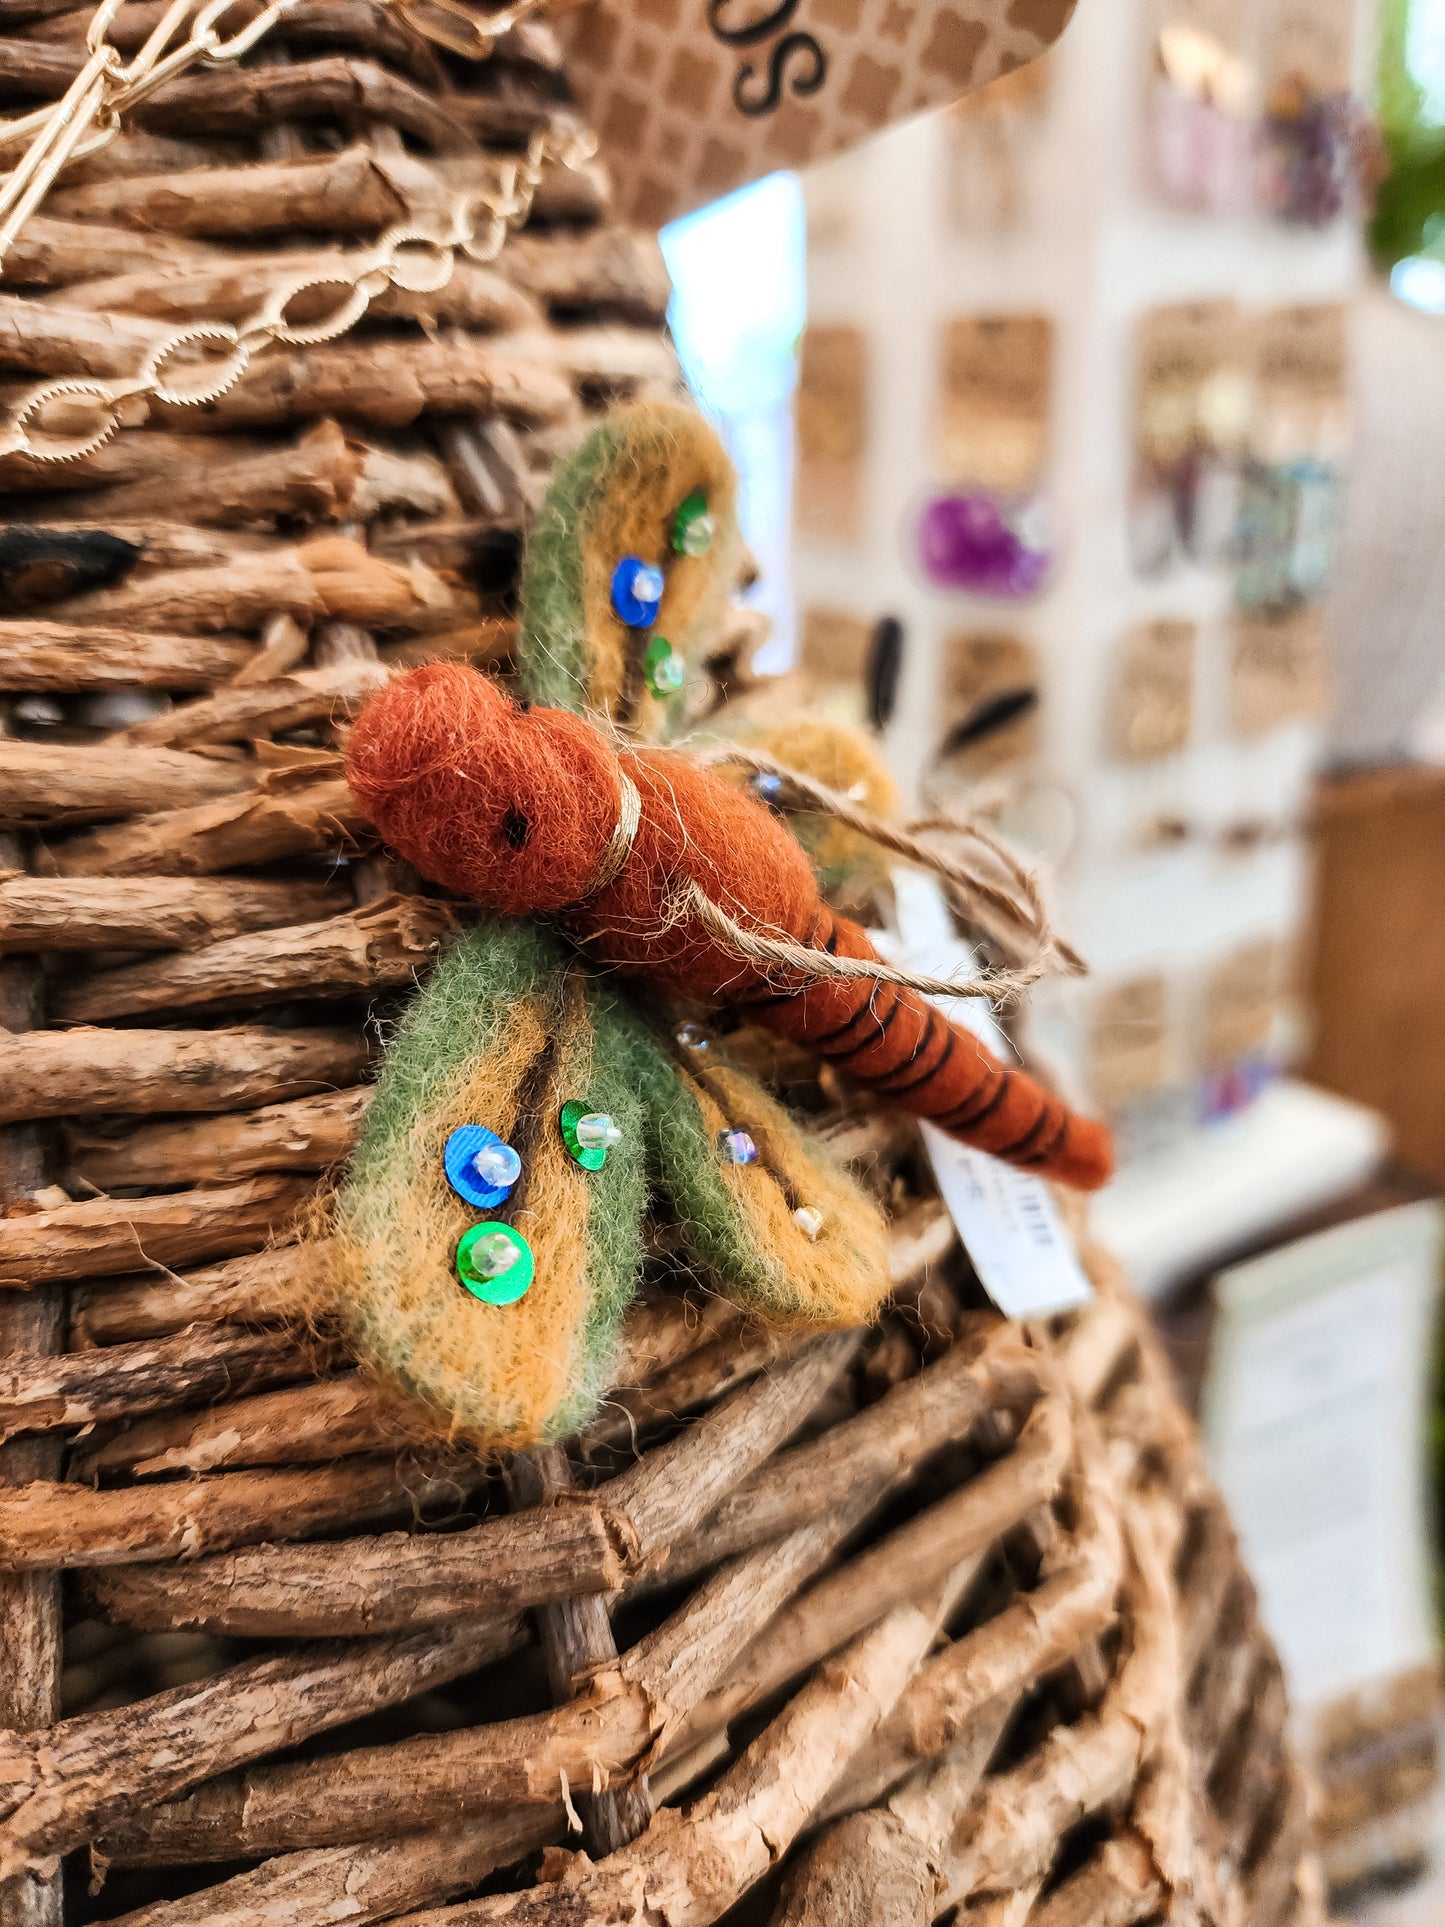 Assorted Handmade Felt Insects